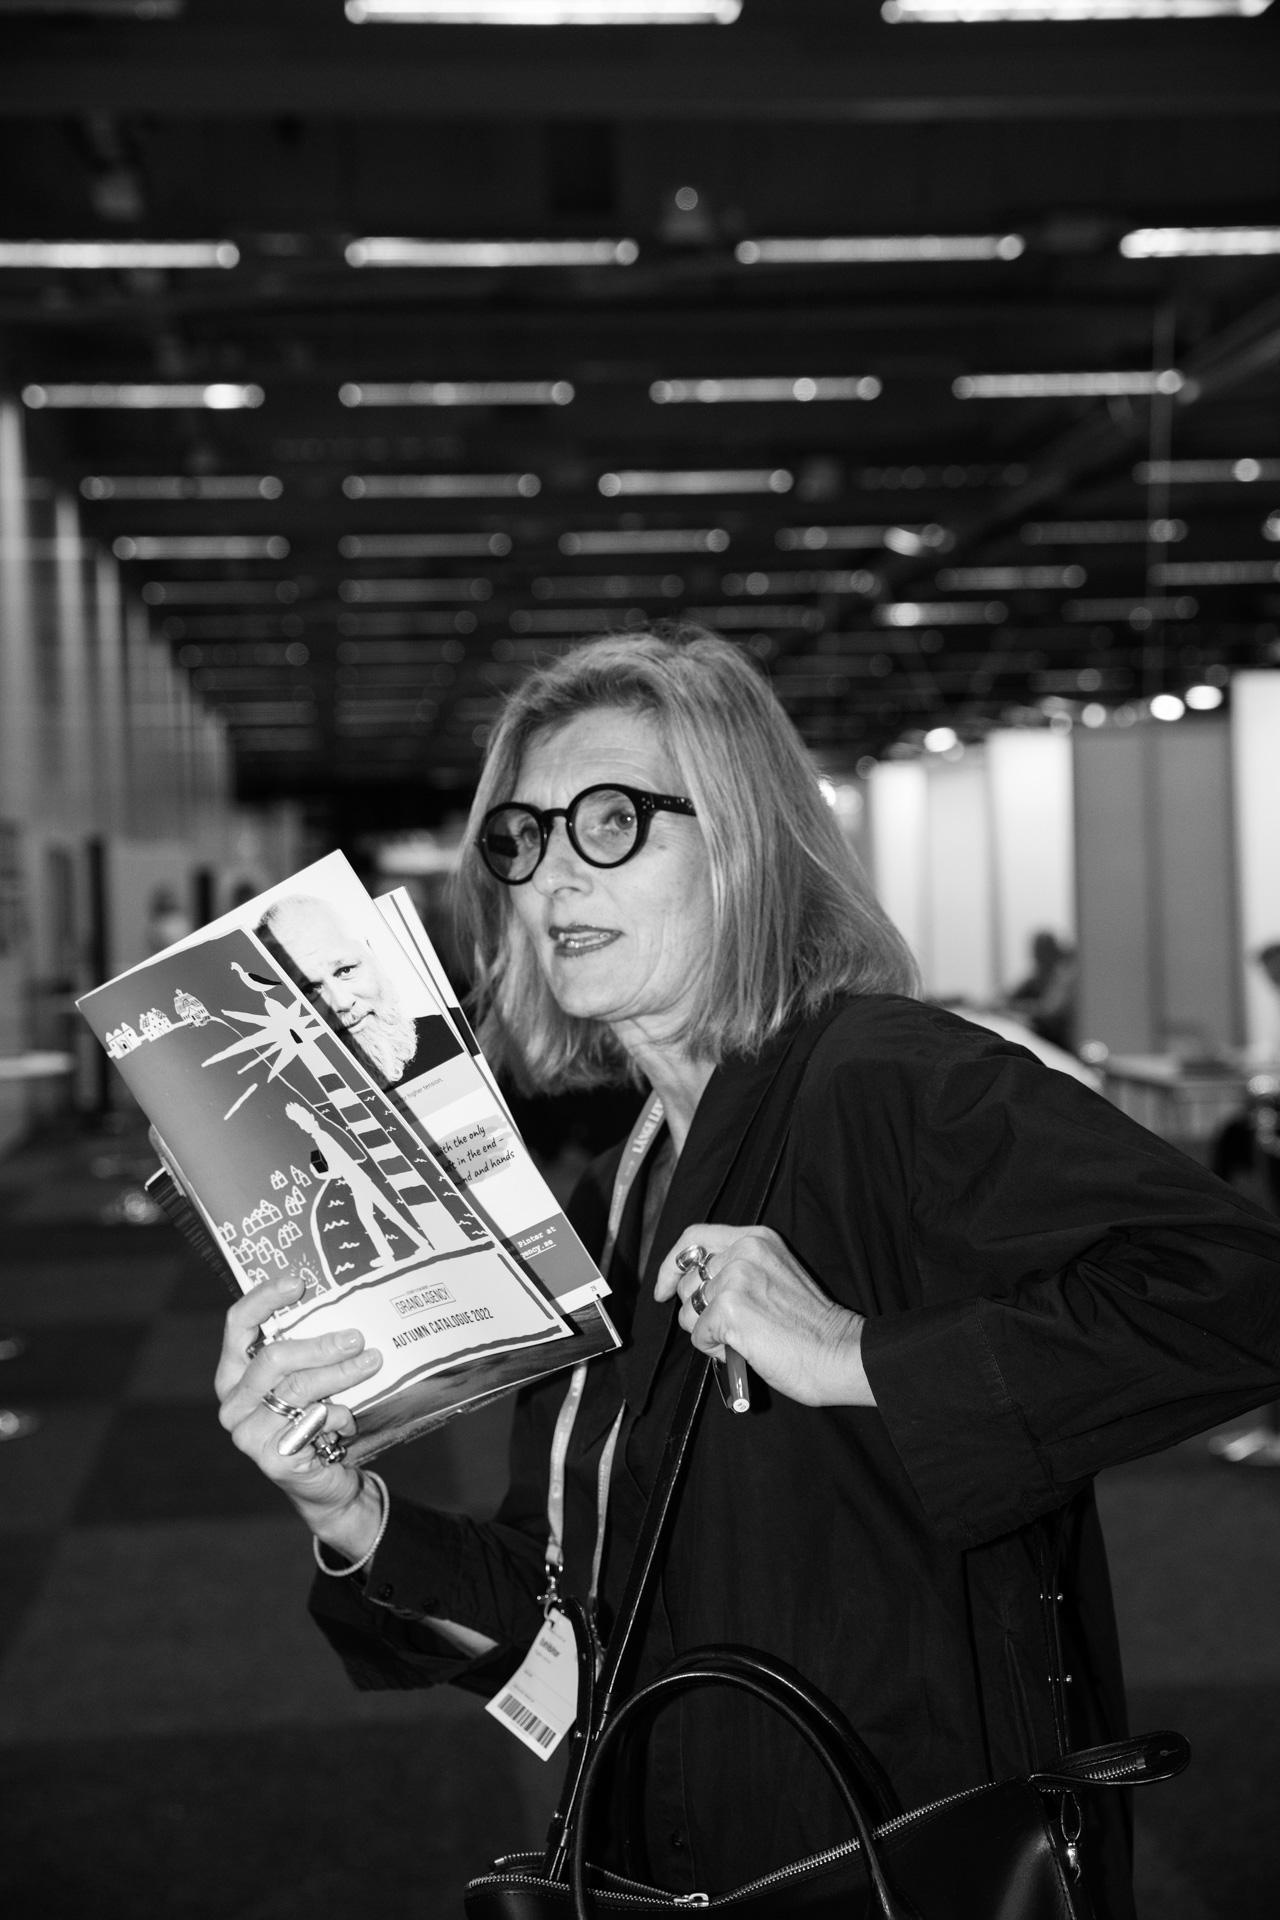 Blond woman in dark dress and glasses holding rights guide